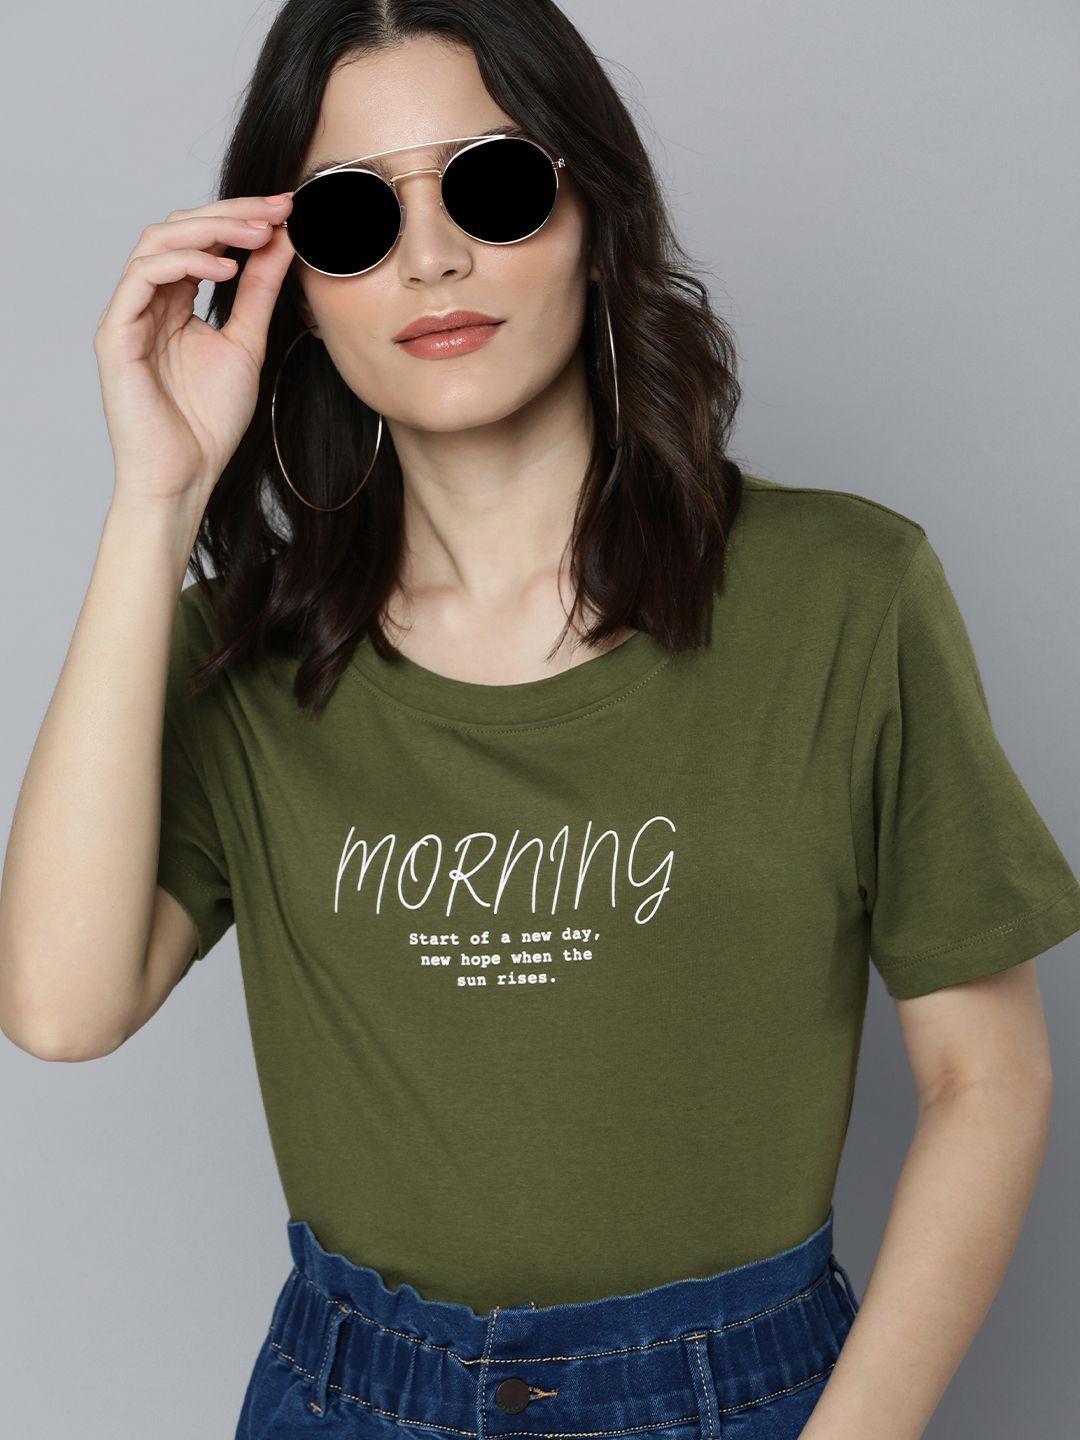 here&now women olive green & white printed casual t-shirt